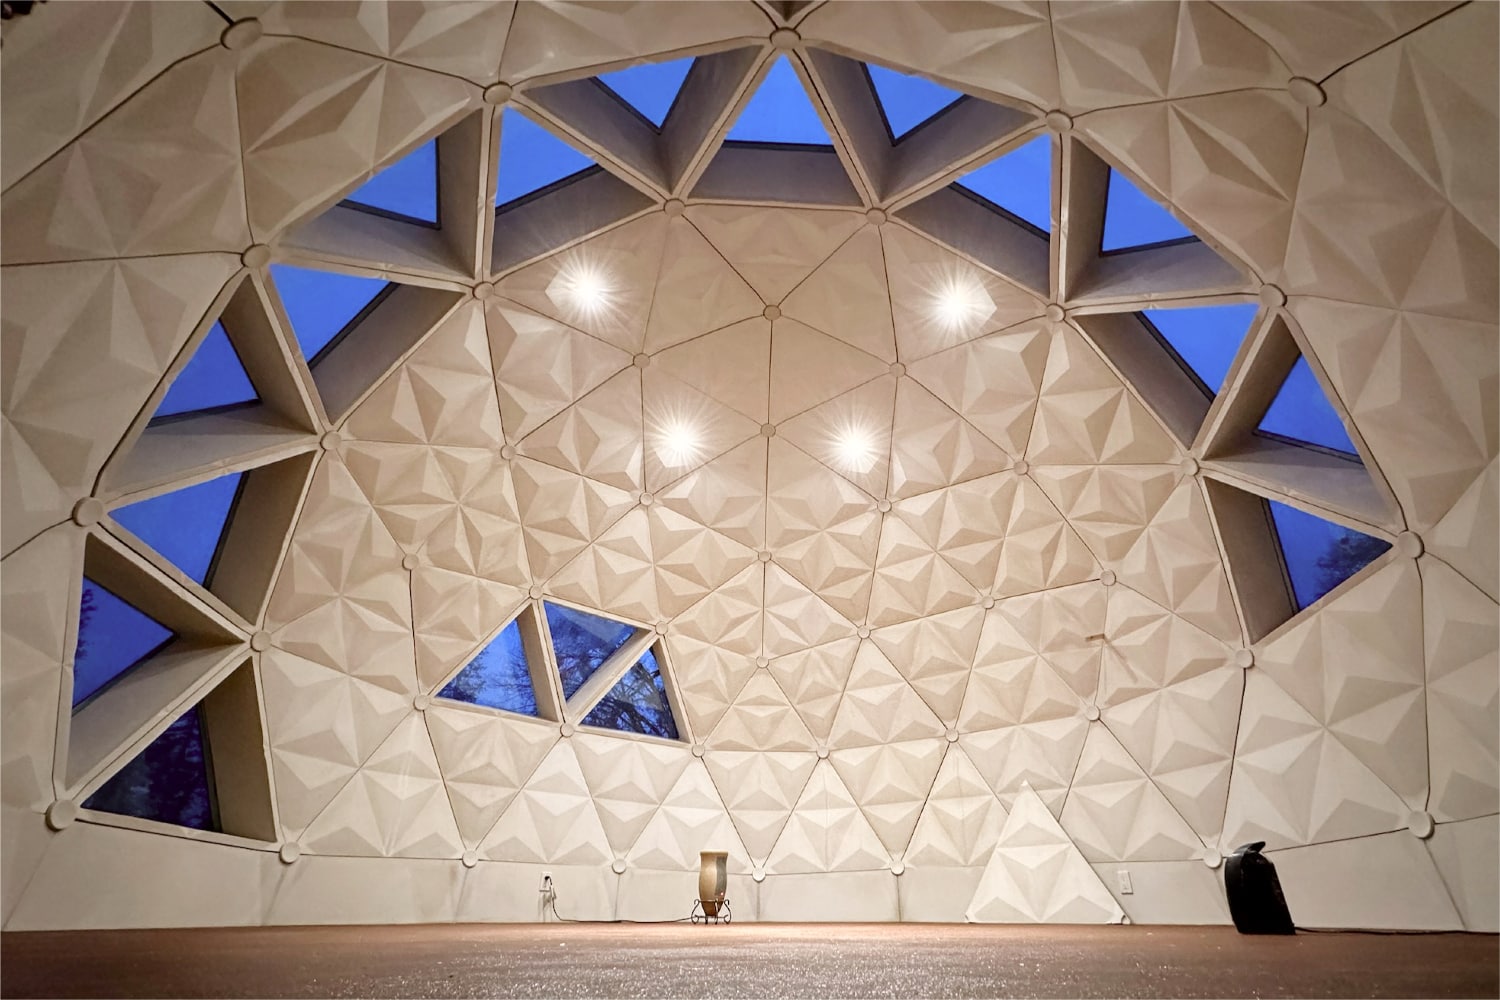 Geodesic Dome Homes, Concrete Dome Homes